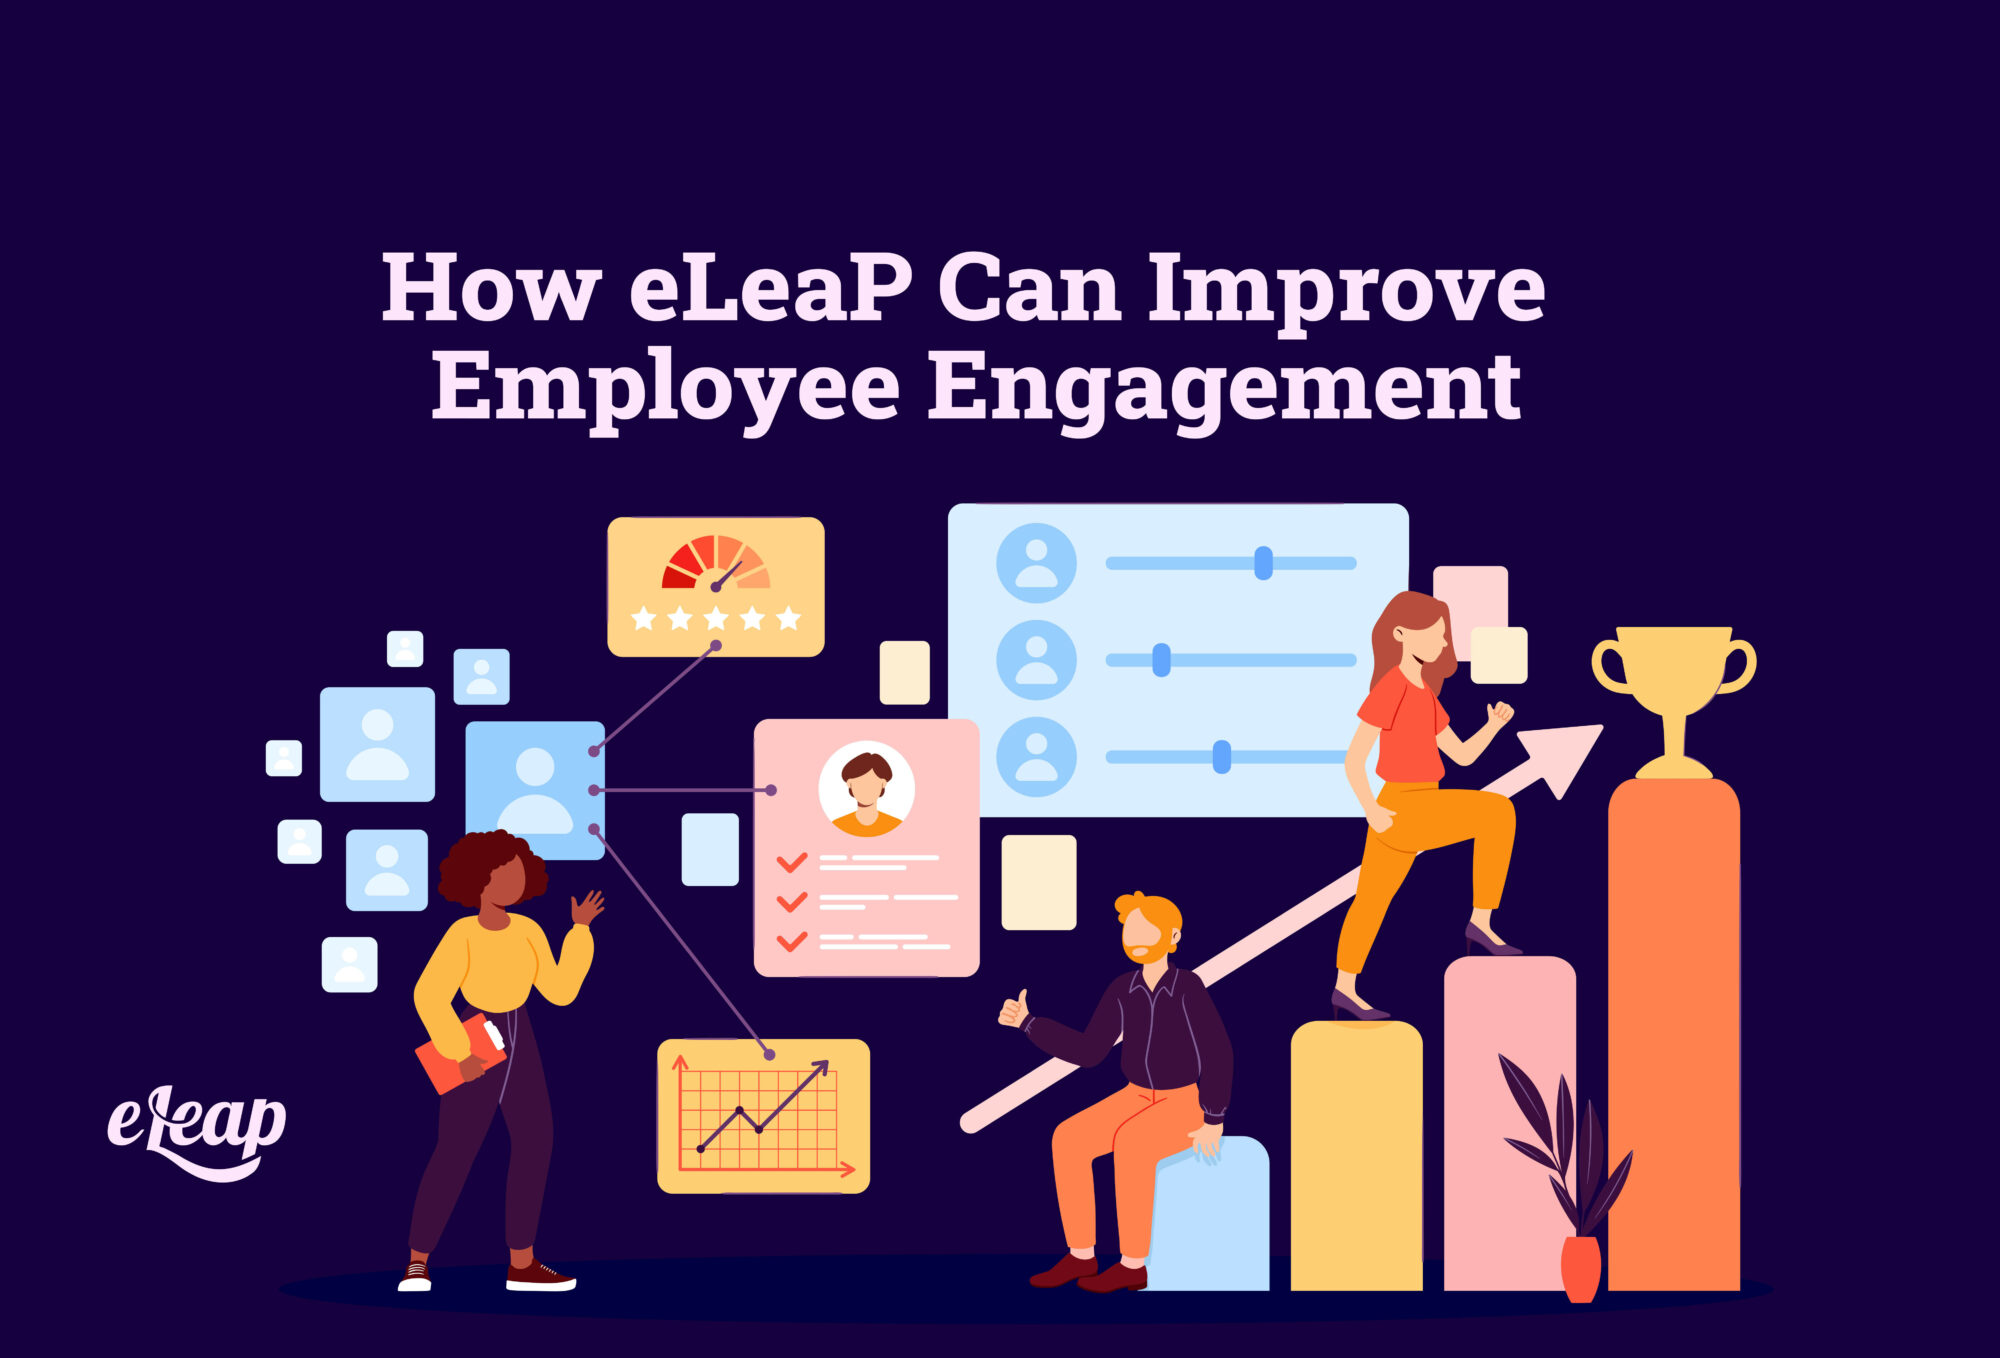 How eLeaP Can Improve Employee Engagement